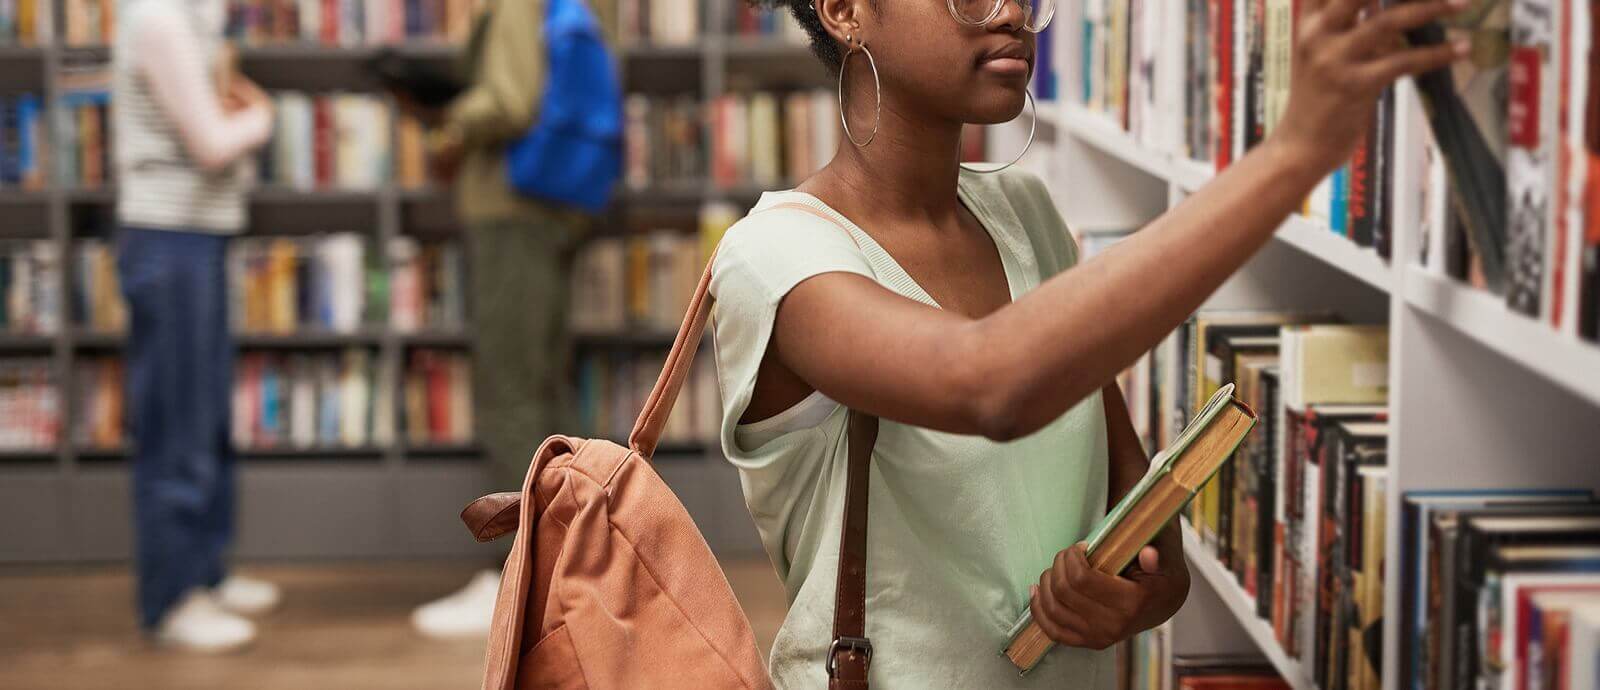 Image of a adolescent pulling a book off a shelf at a school library. Representing the stress that therapy for teens can help with in Reading & Wyomissing, PA. You can find teen counseling "near me" with an online teen therapist in Pennsylvania.